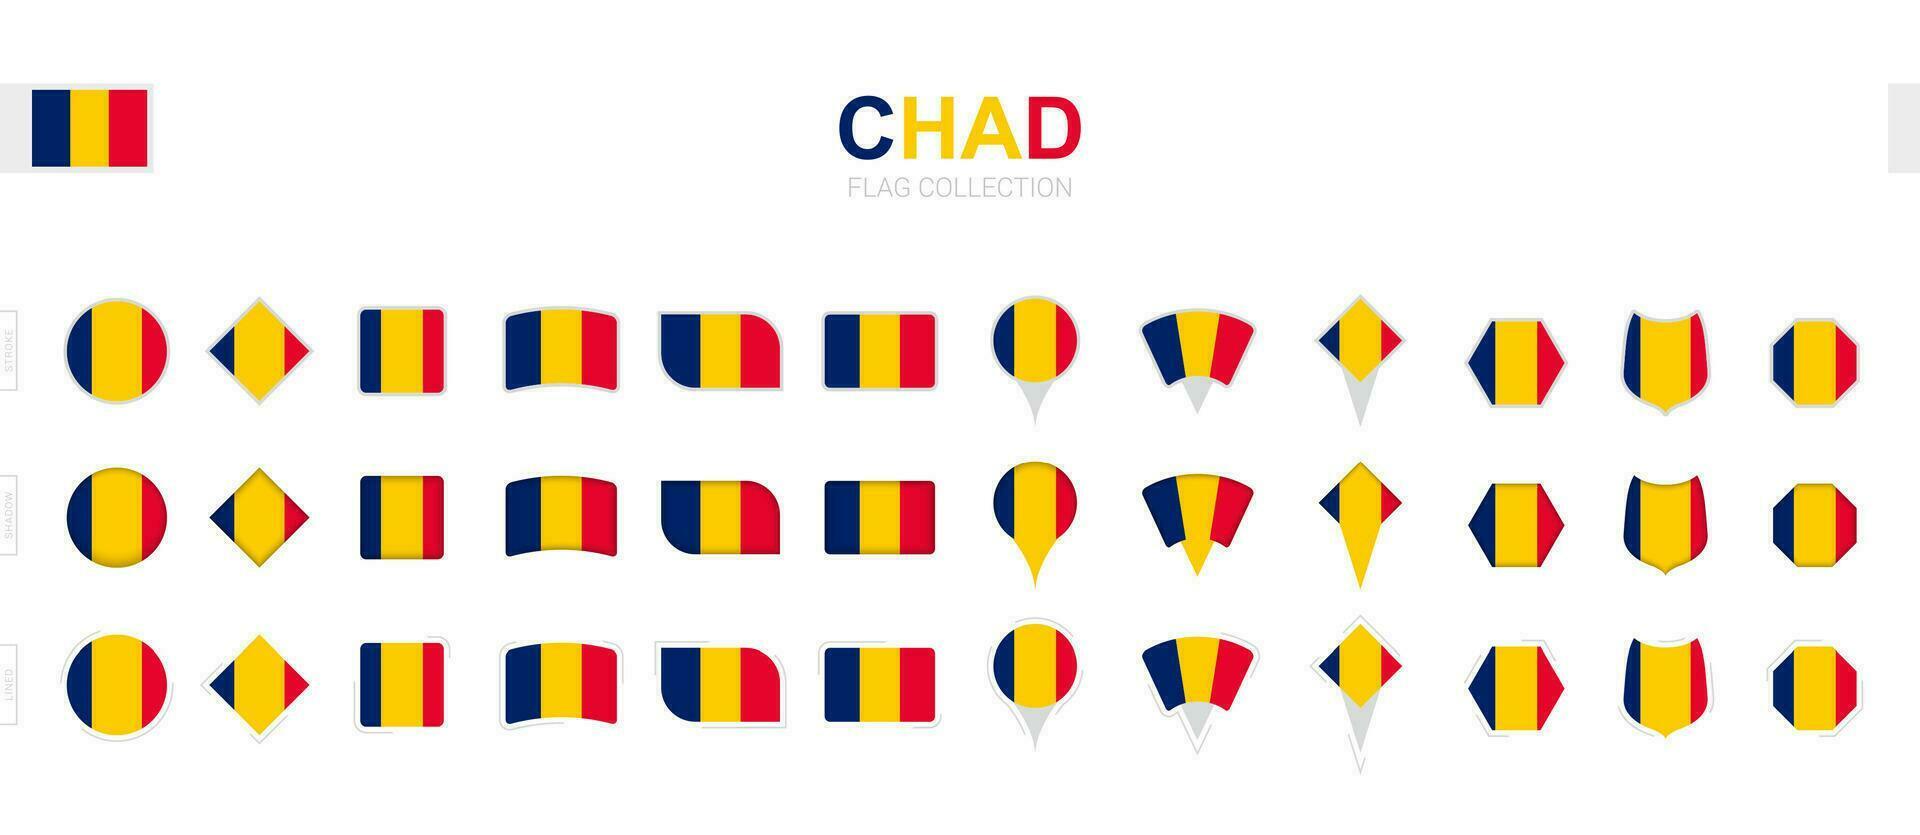 Large collection of Chad flags of various shapes and effects. vector